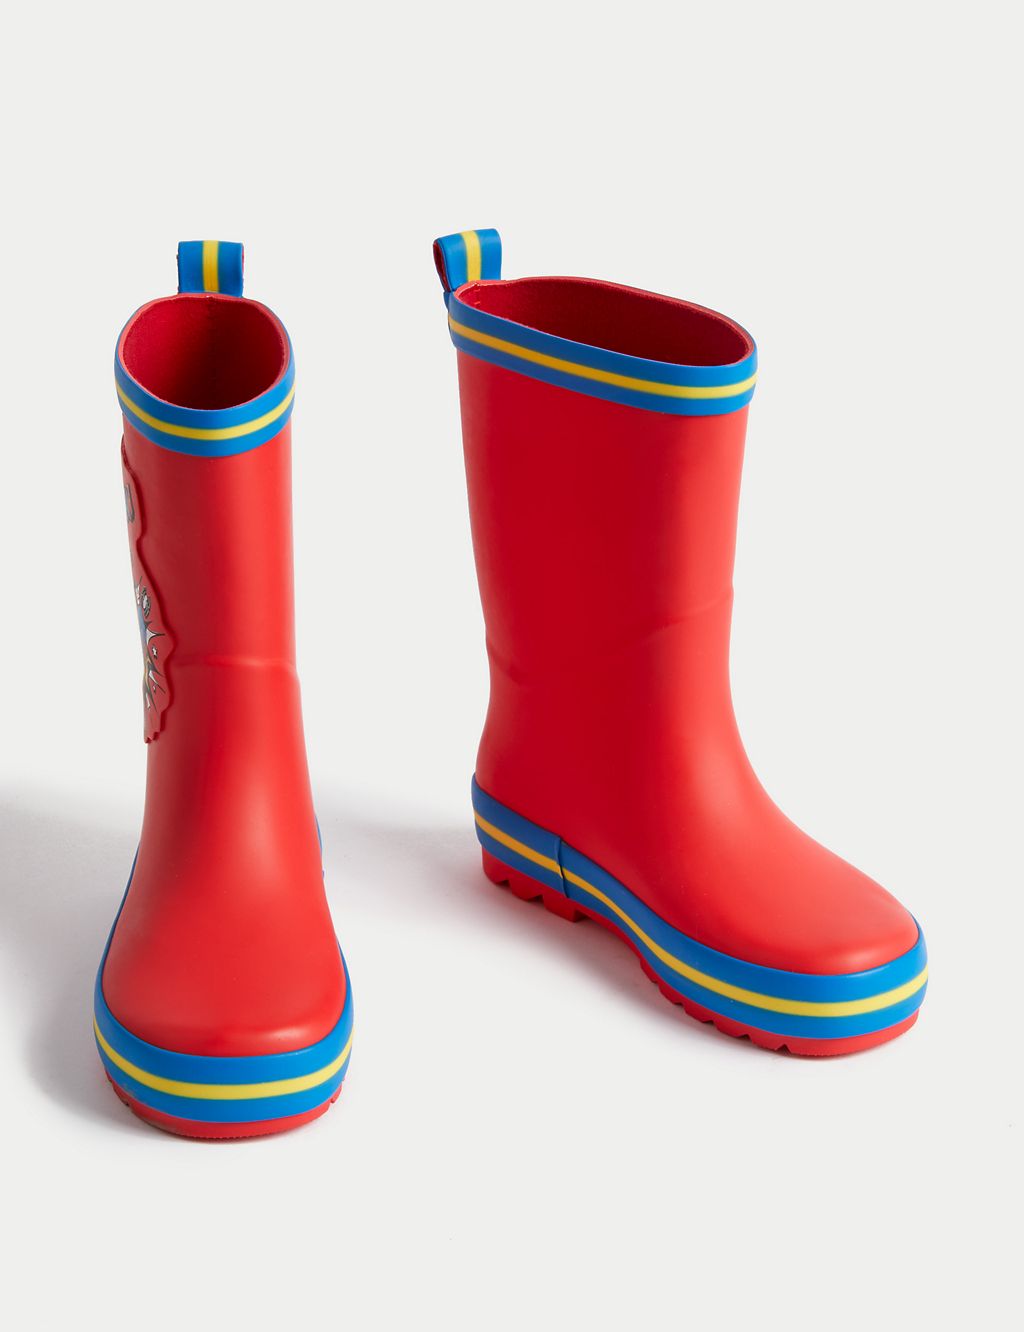 Kids' Spider-Man™ Wellies (4 Small - 13 Small) 1 of 4